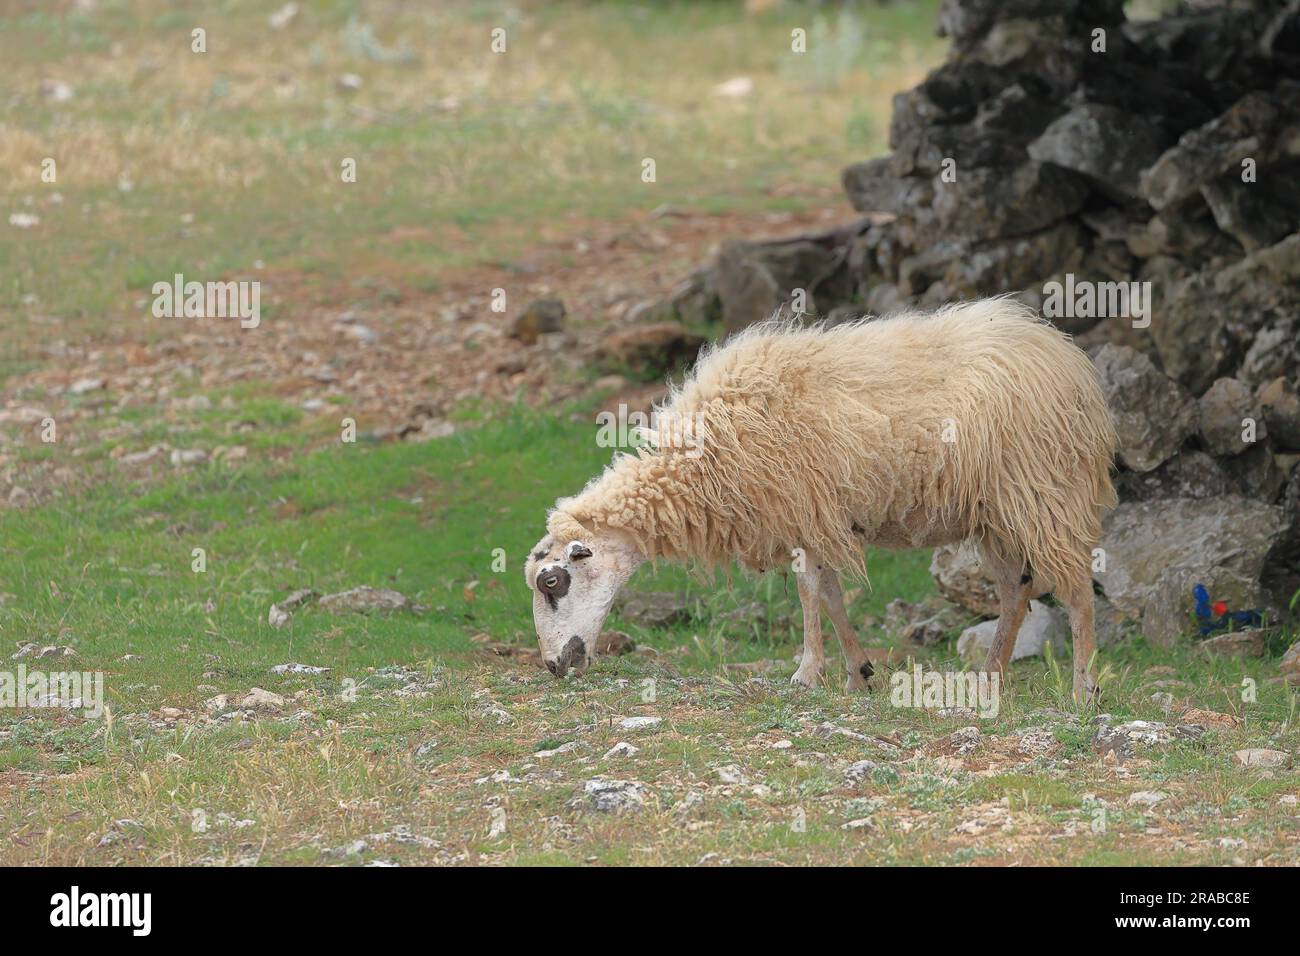 close up of a grazing sheep Stock Photo